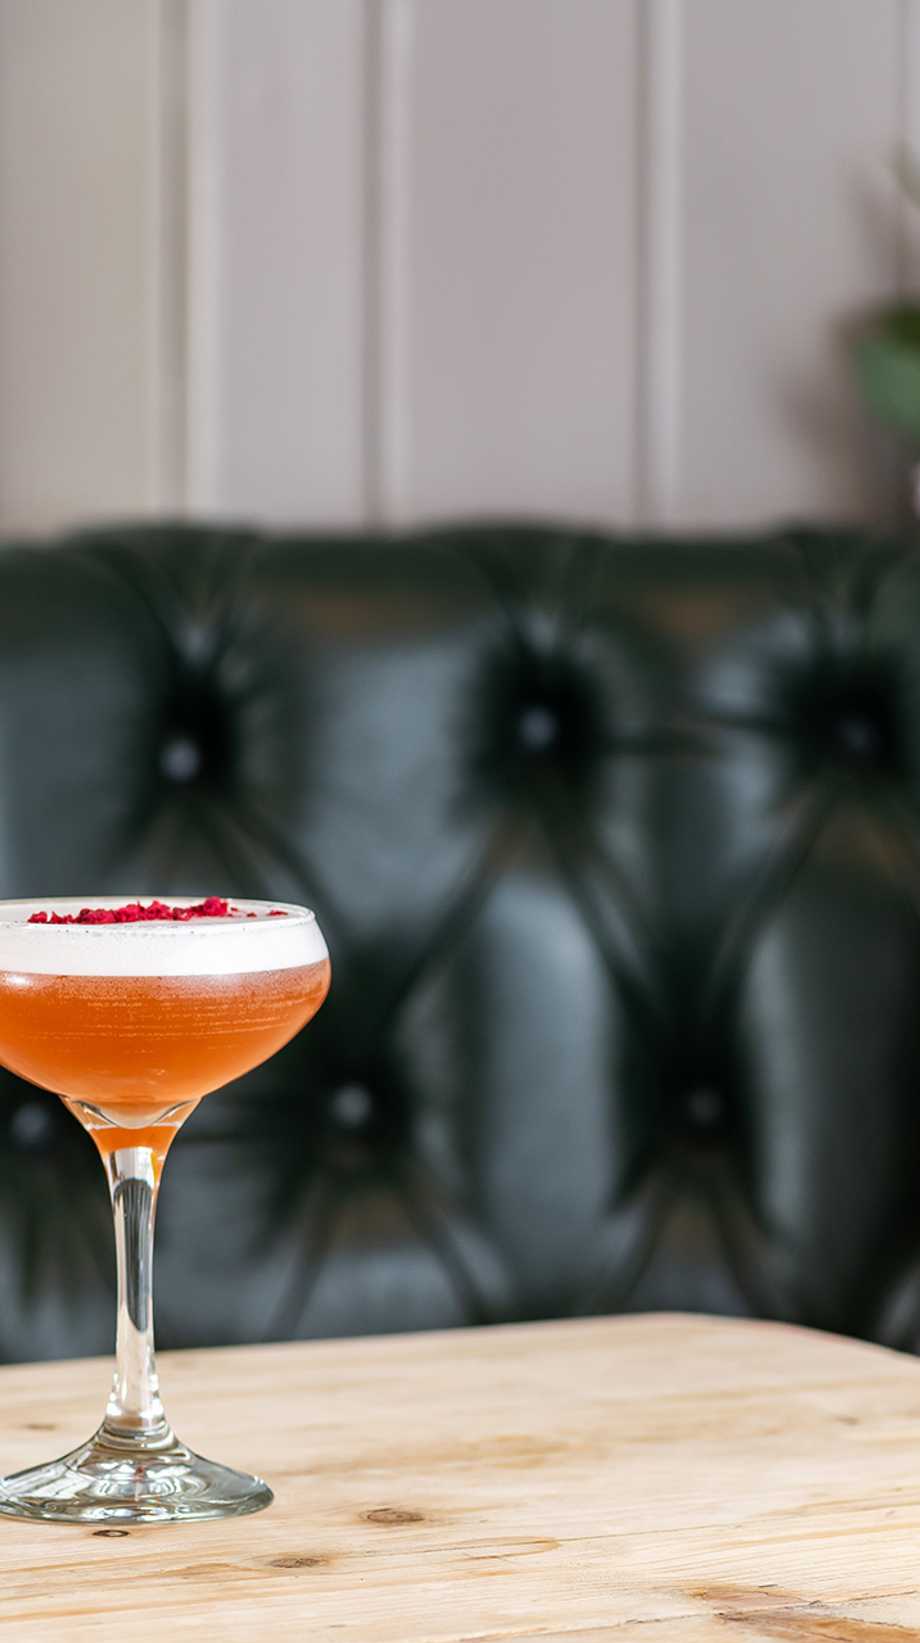 Two fruity cocktails are sitting on a table, set against a black leather booth and cushions.